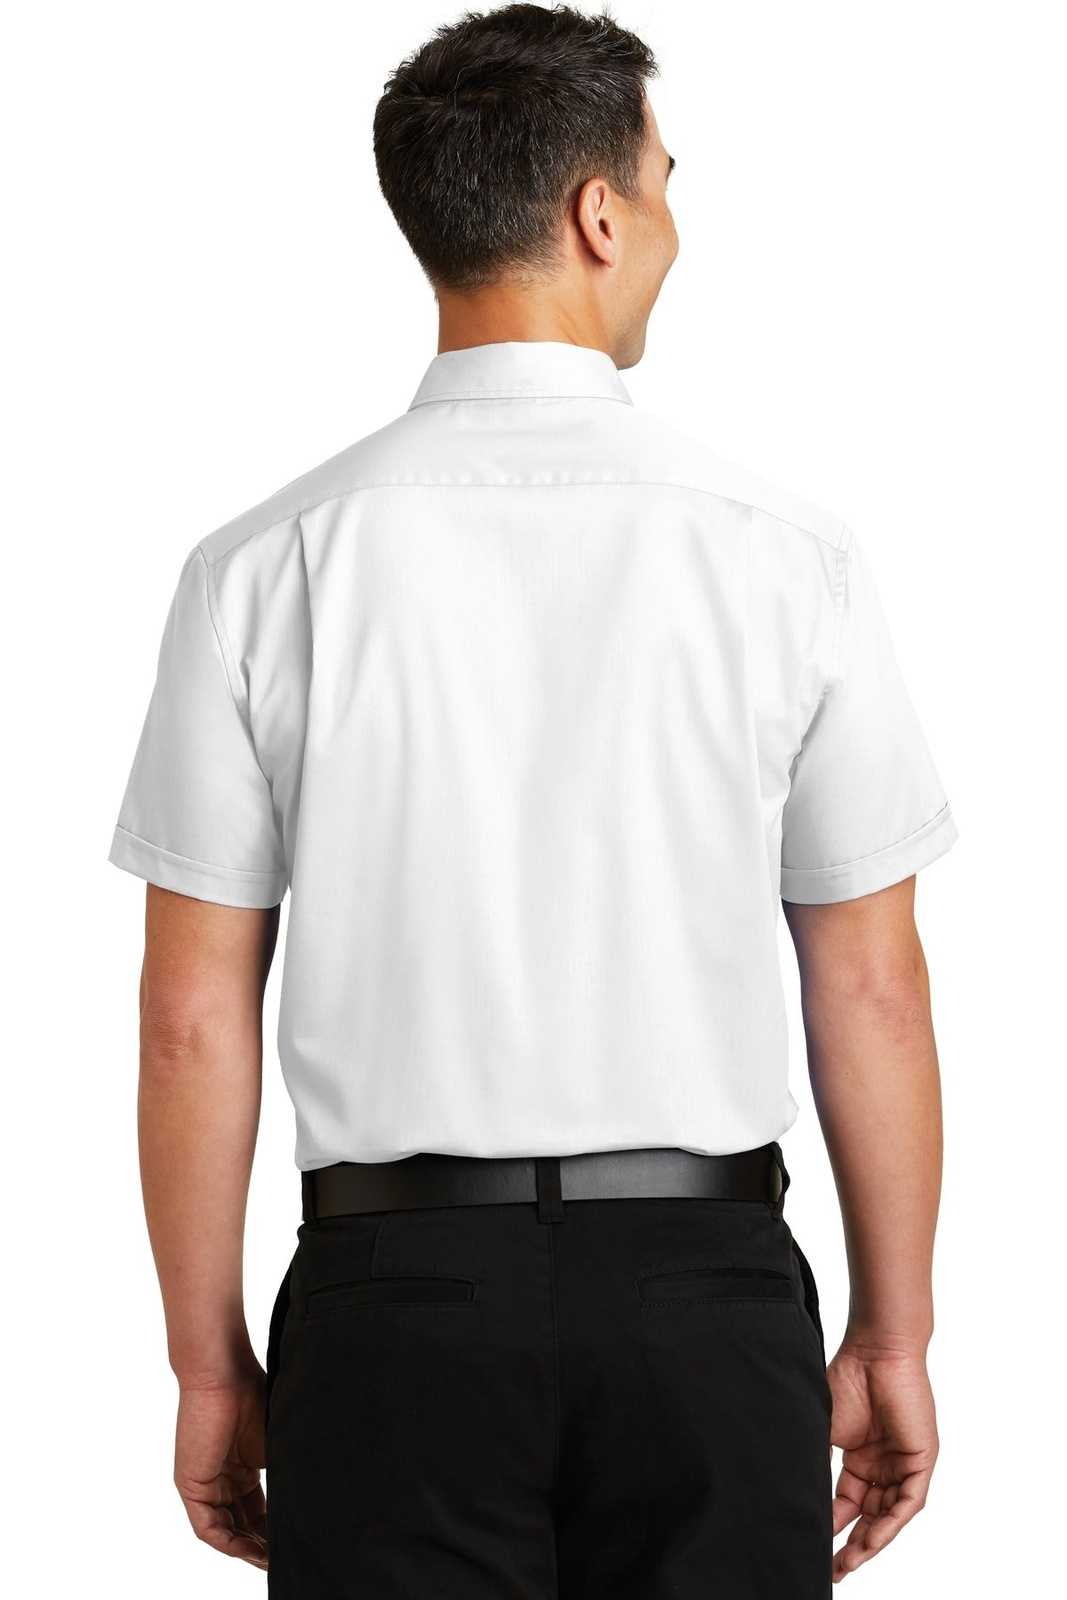 Port Authority S664 Short Sleeve Superpro Twill Shirt - White - HIT a Double - 1